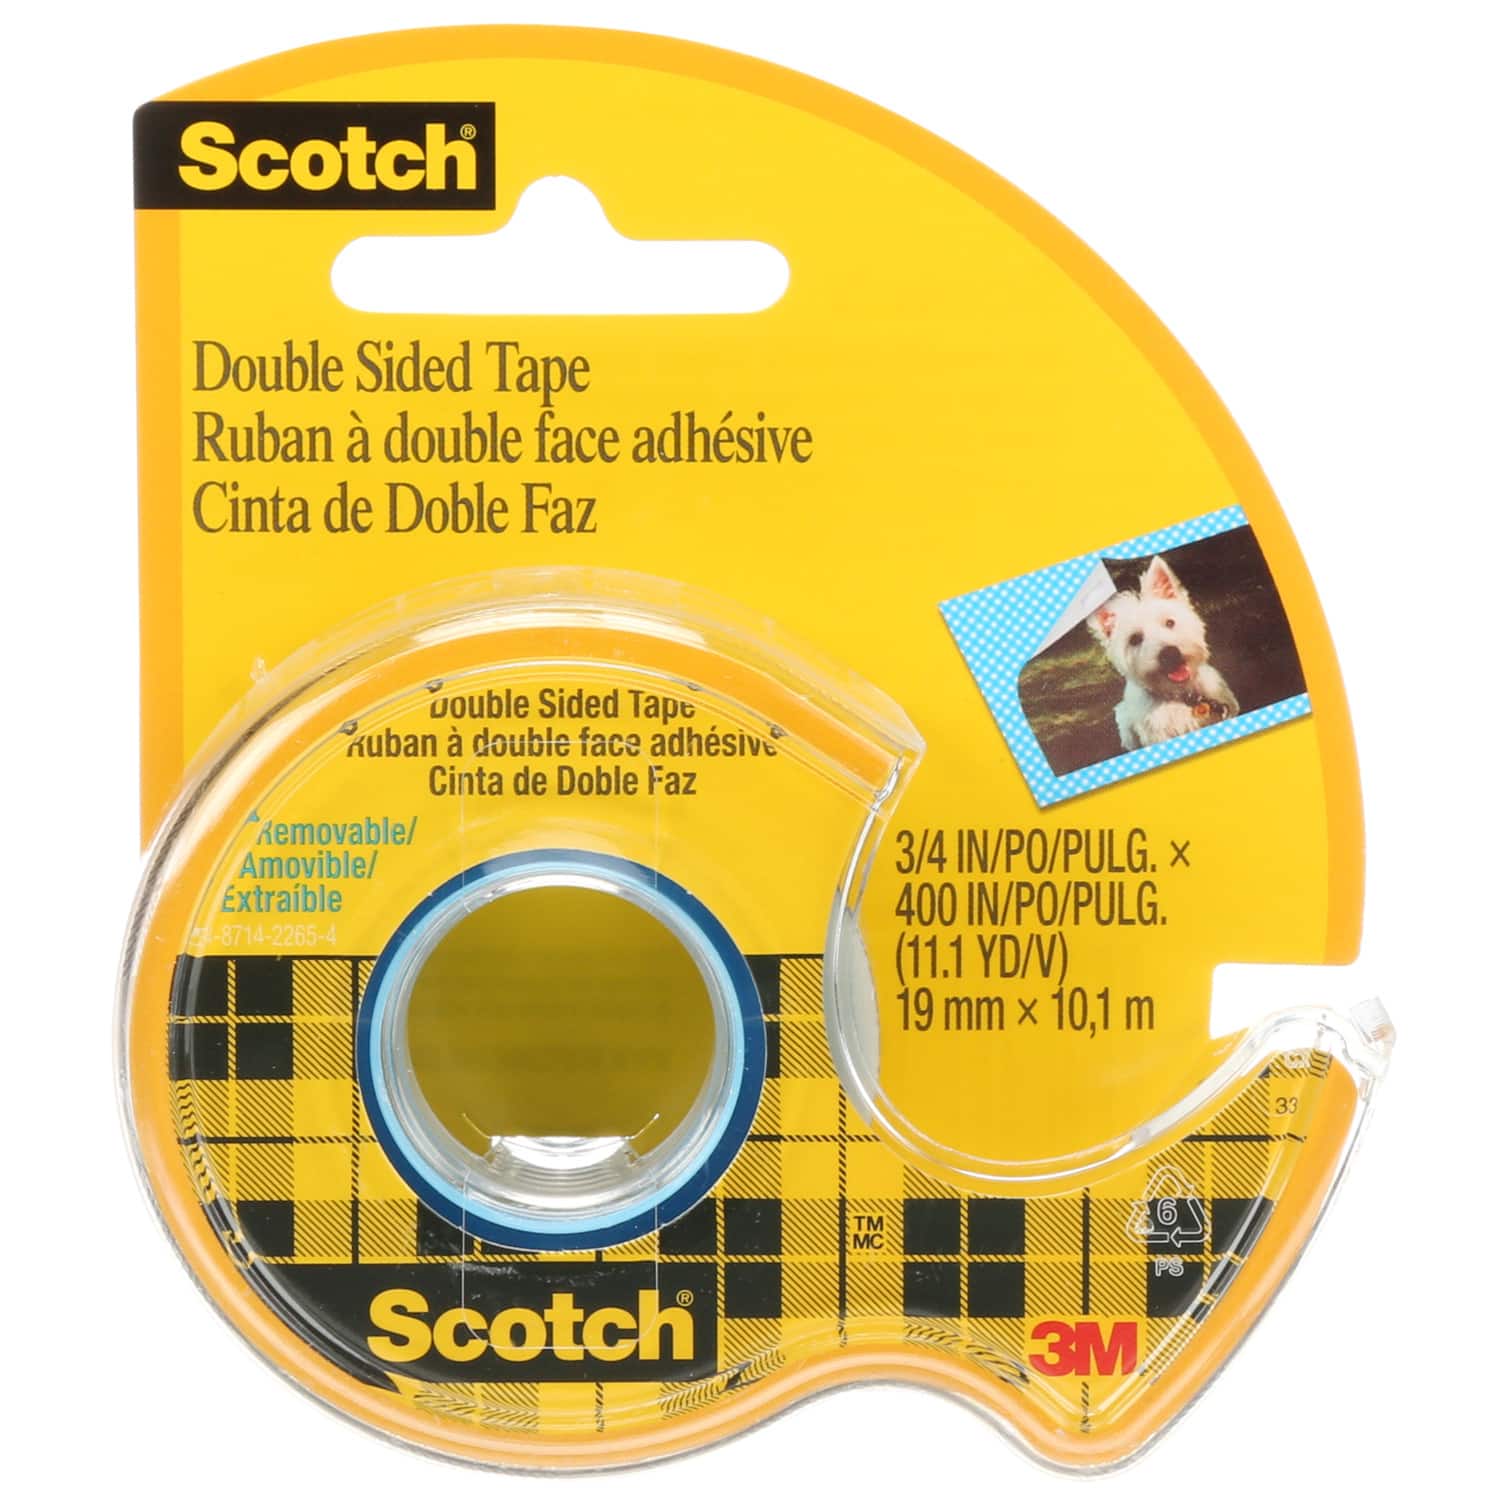 Removable Double-Sided Mounting Tape at